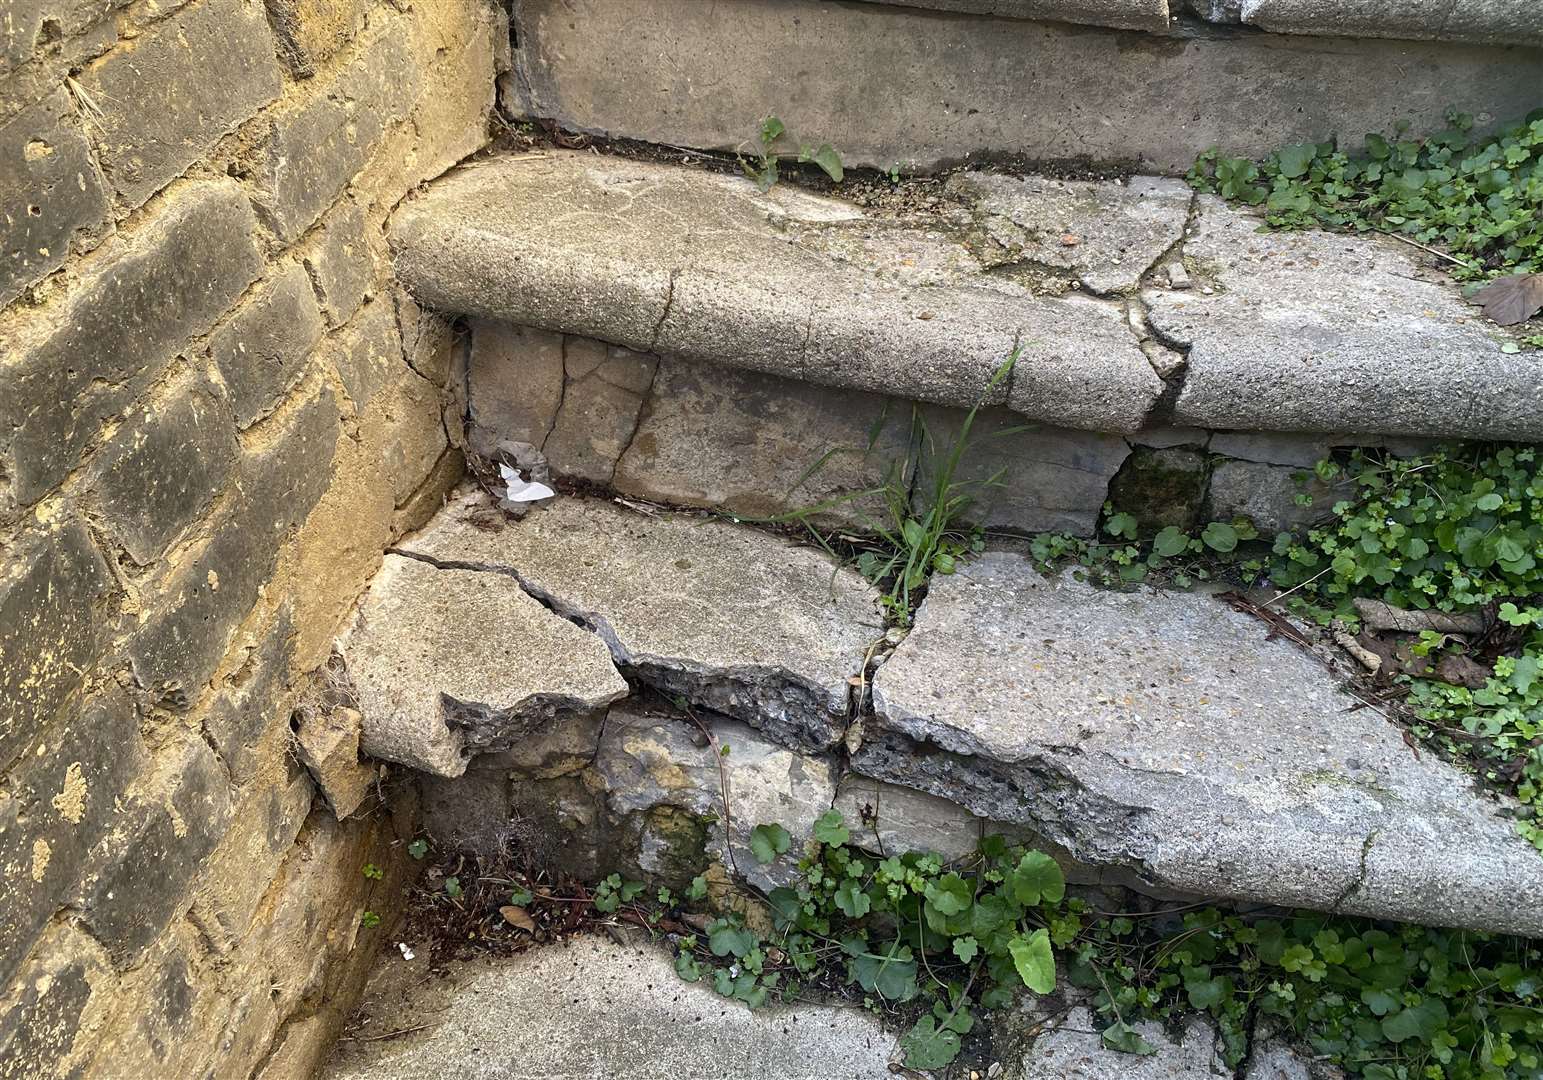 The steps in Constitution Road, Luton, are falling apart